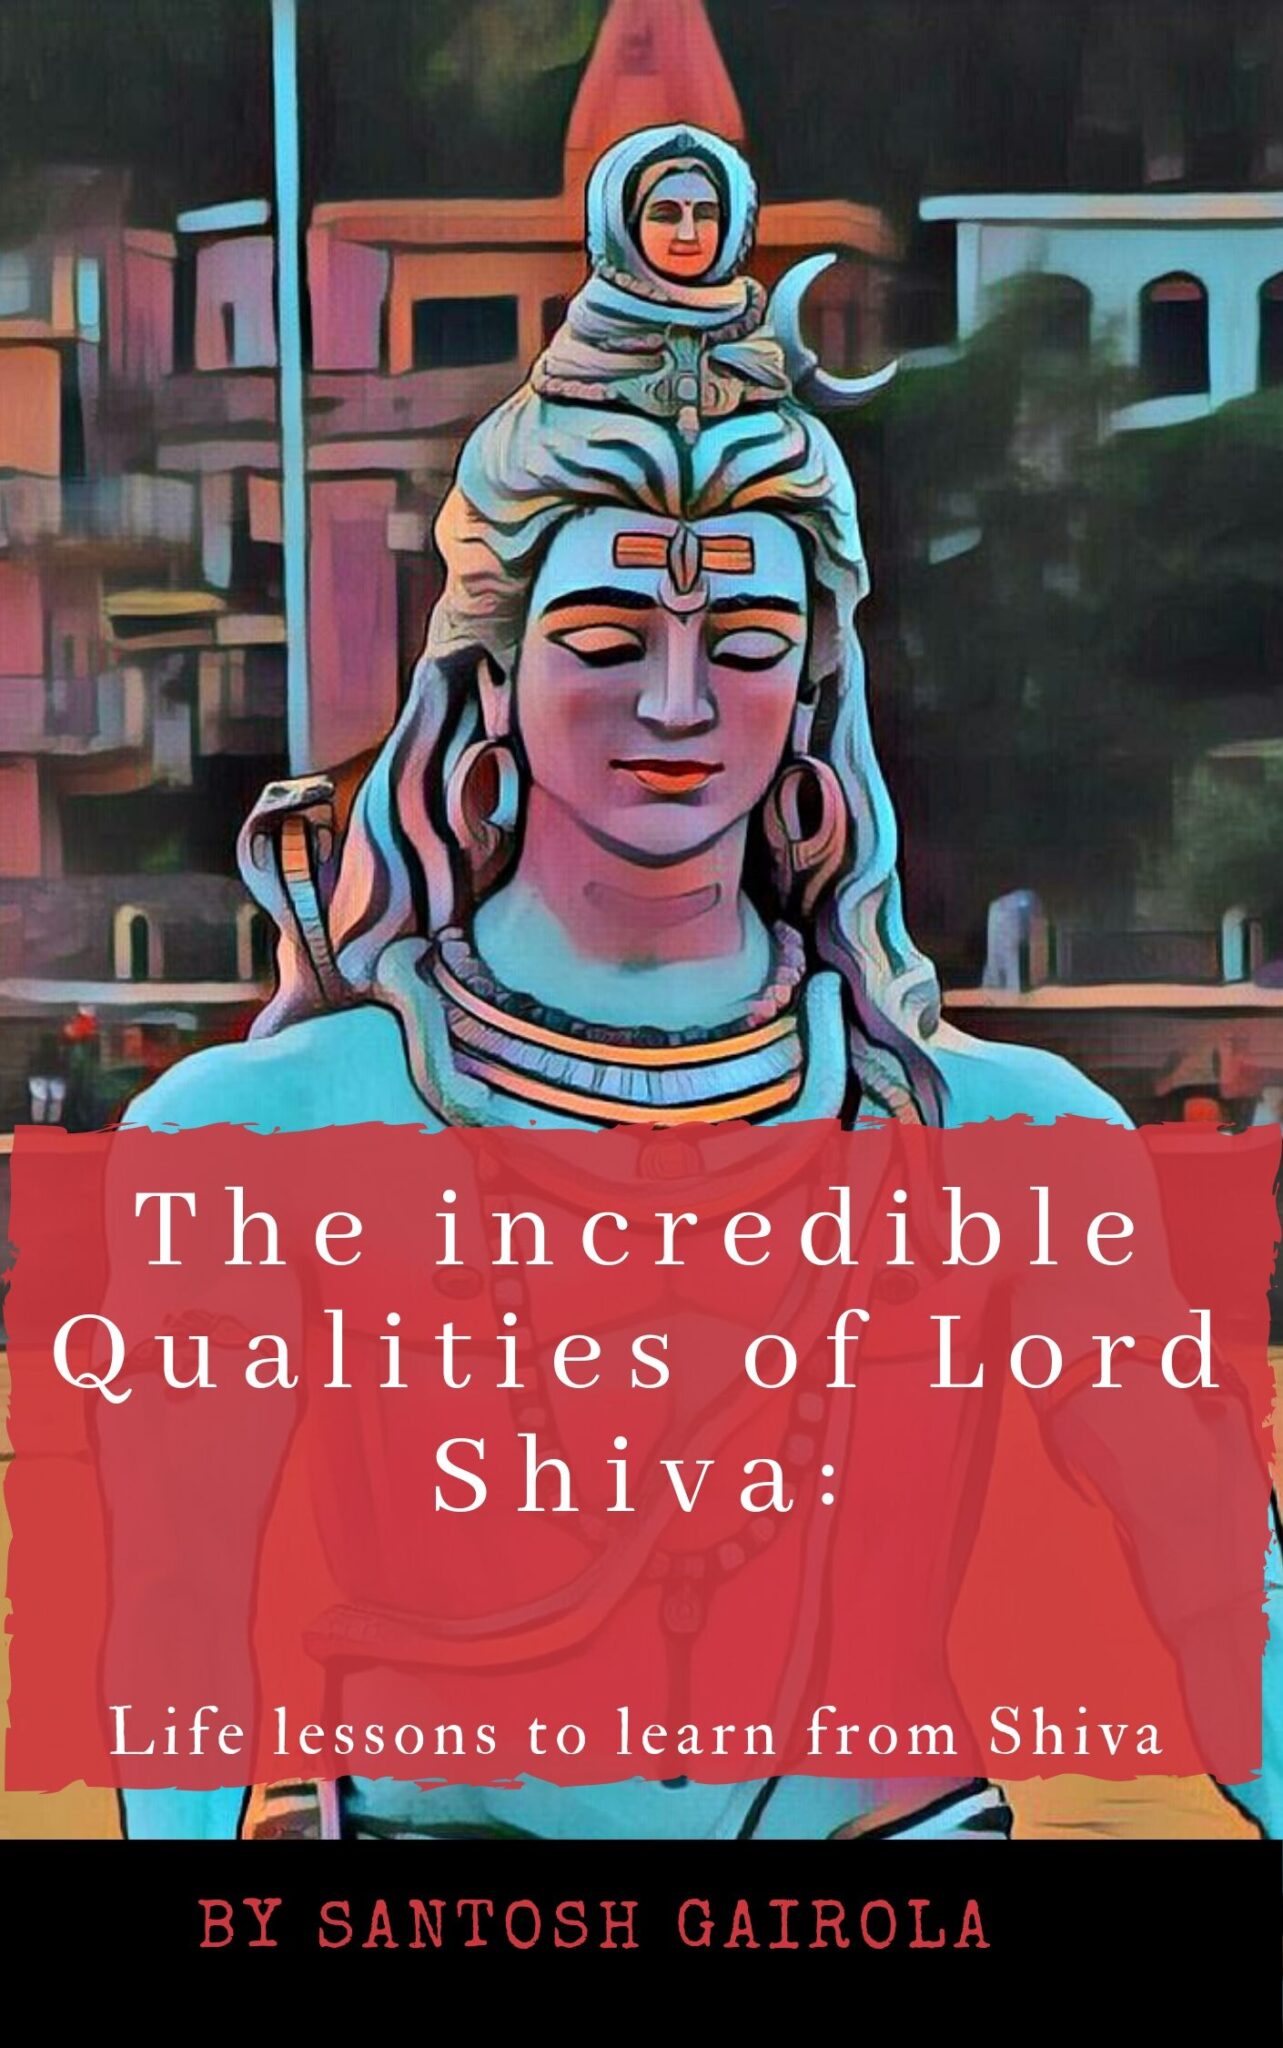 The incredible Qualities of Lord Shiva: Life lessons to learn from Shiva